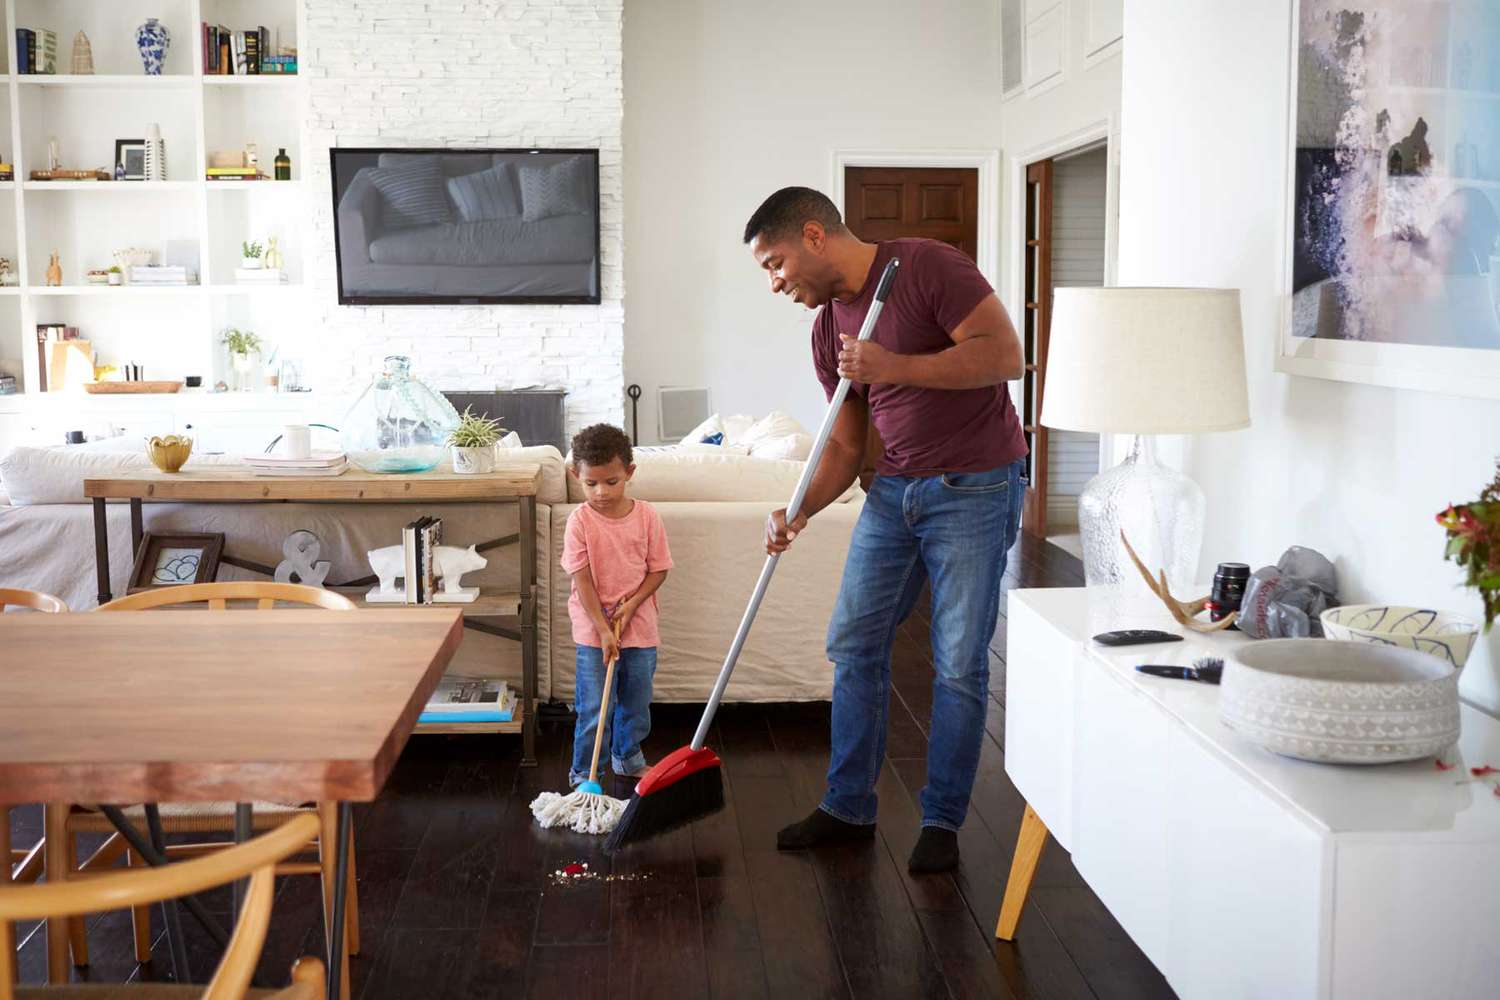 12 Home Cleaning Hacks From Hotel Housekeeping and Professional Organizers (Video)